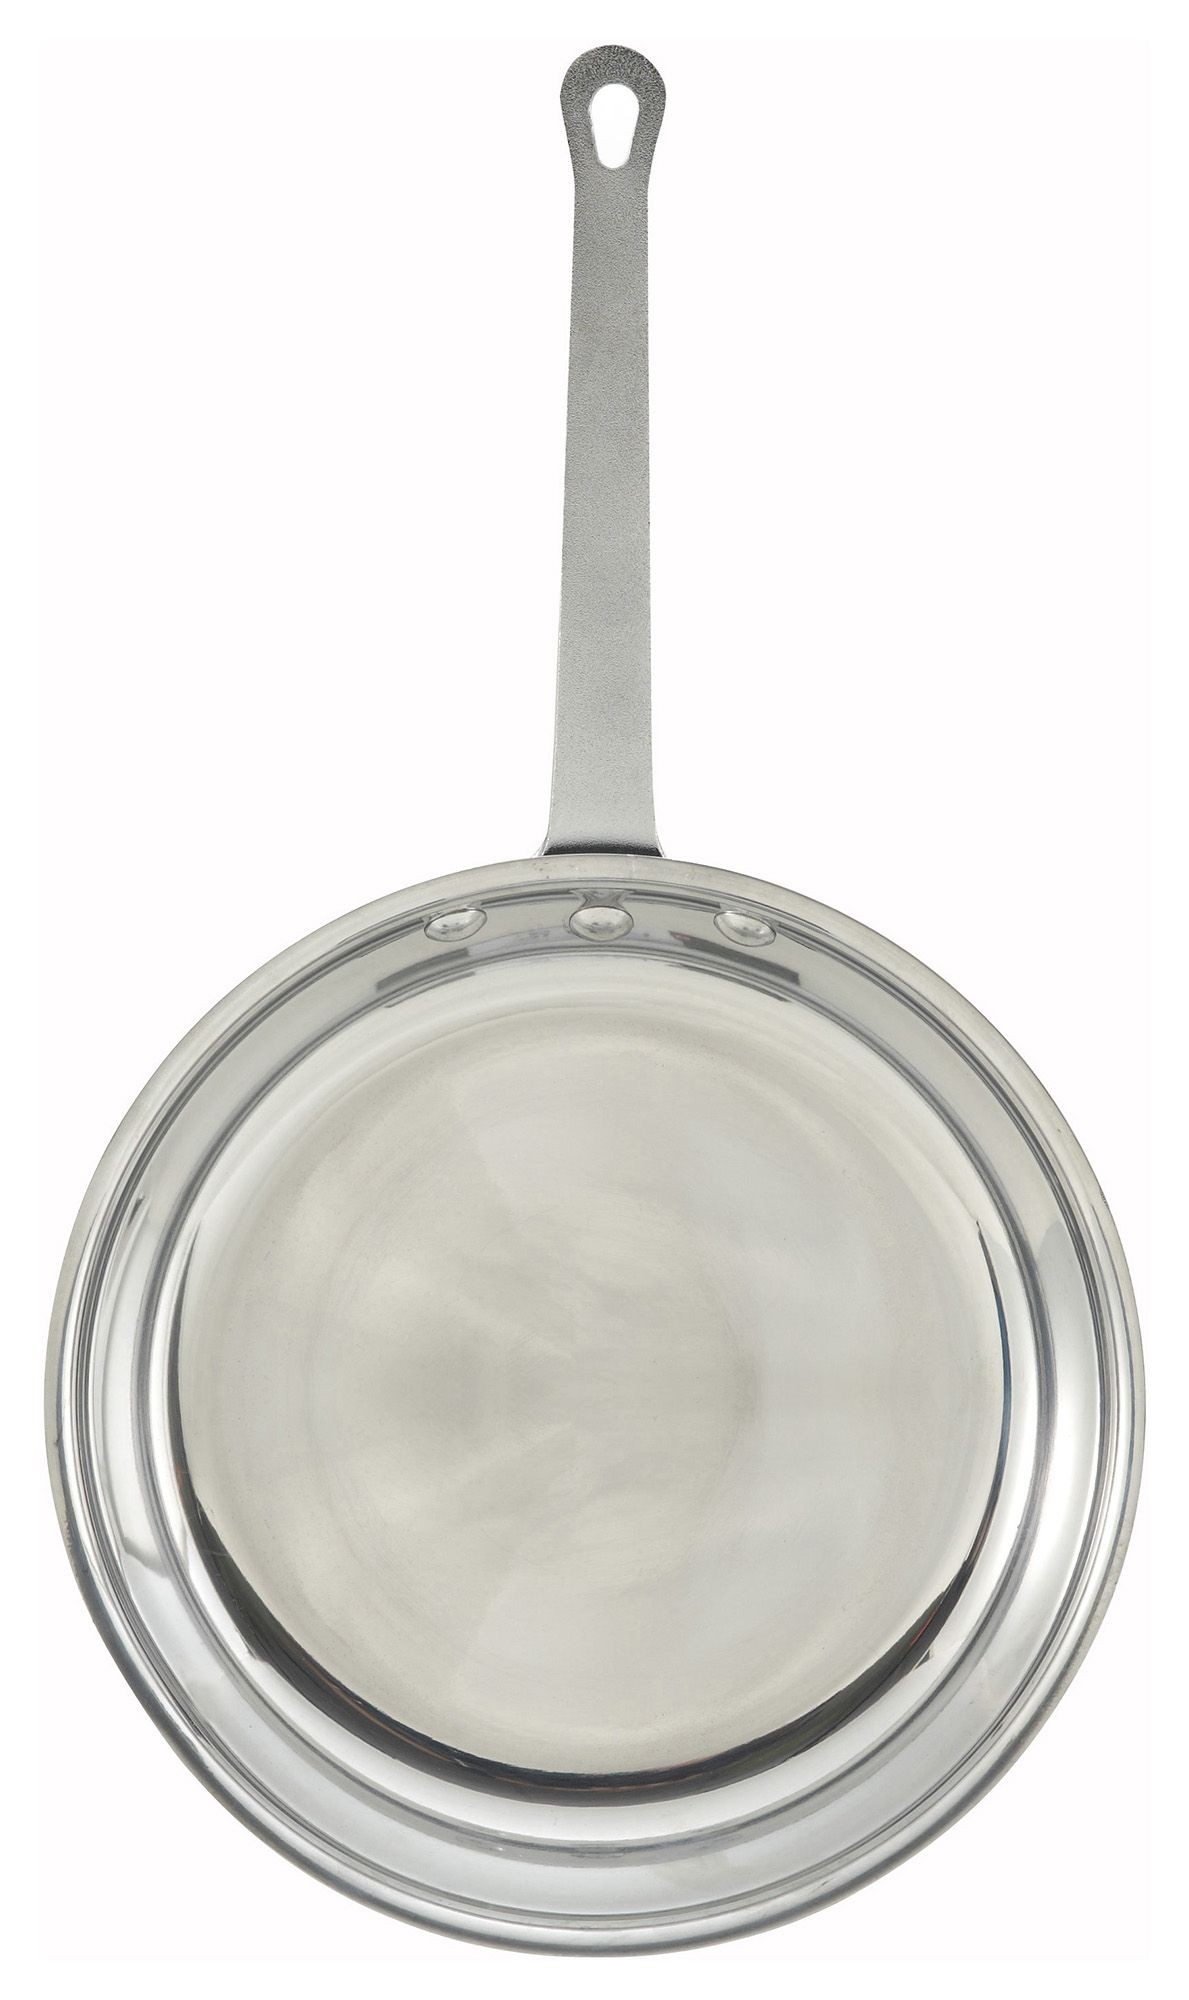 Winco AFP-7 7" Majestic Aluminum Fry Pan with Mirror Finish